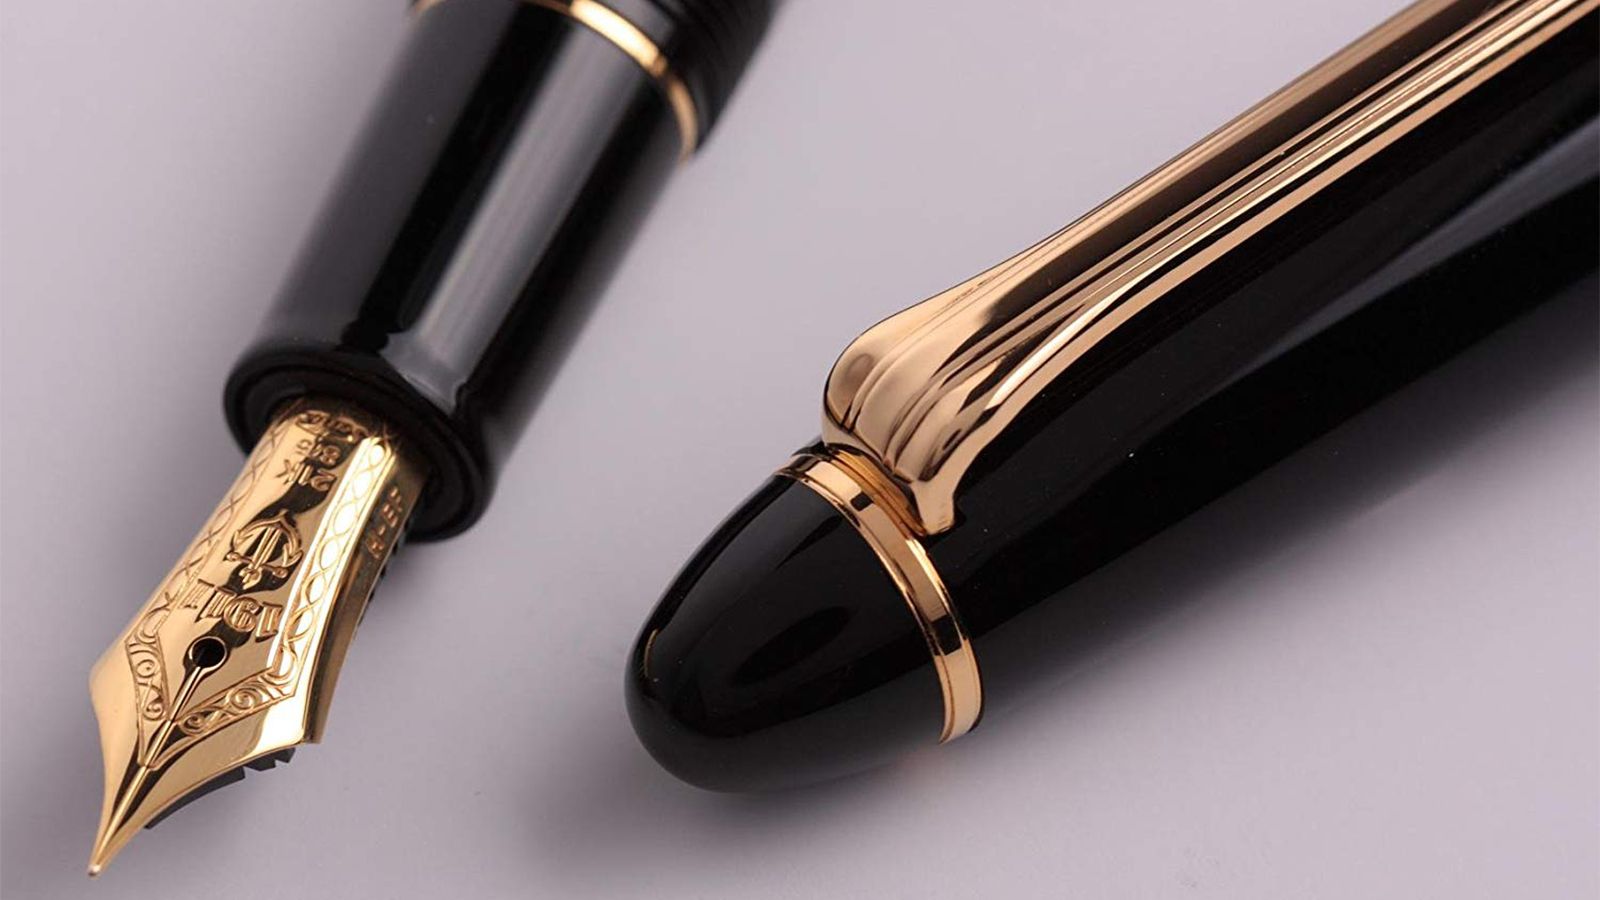 The gold-plated nib and cap of the Sailor Profit Fountain Pen in Black.